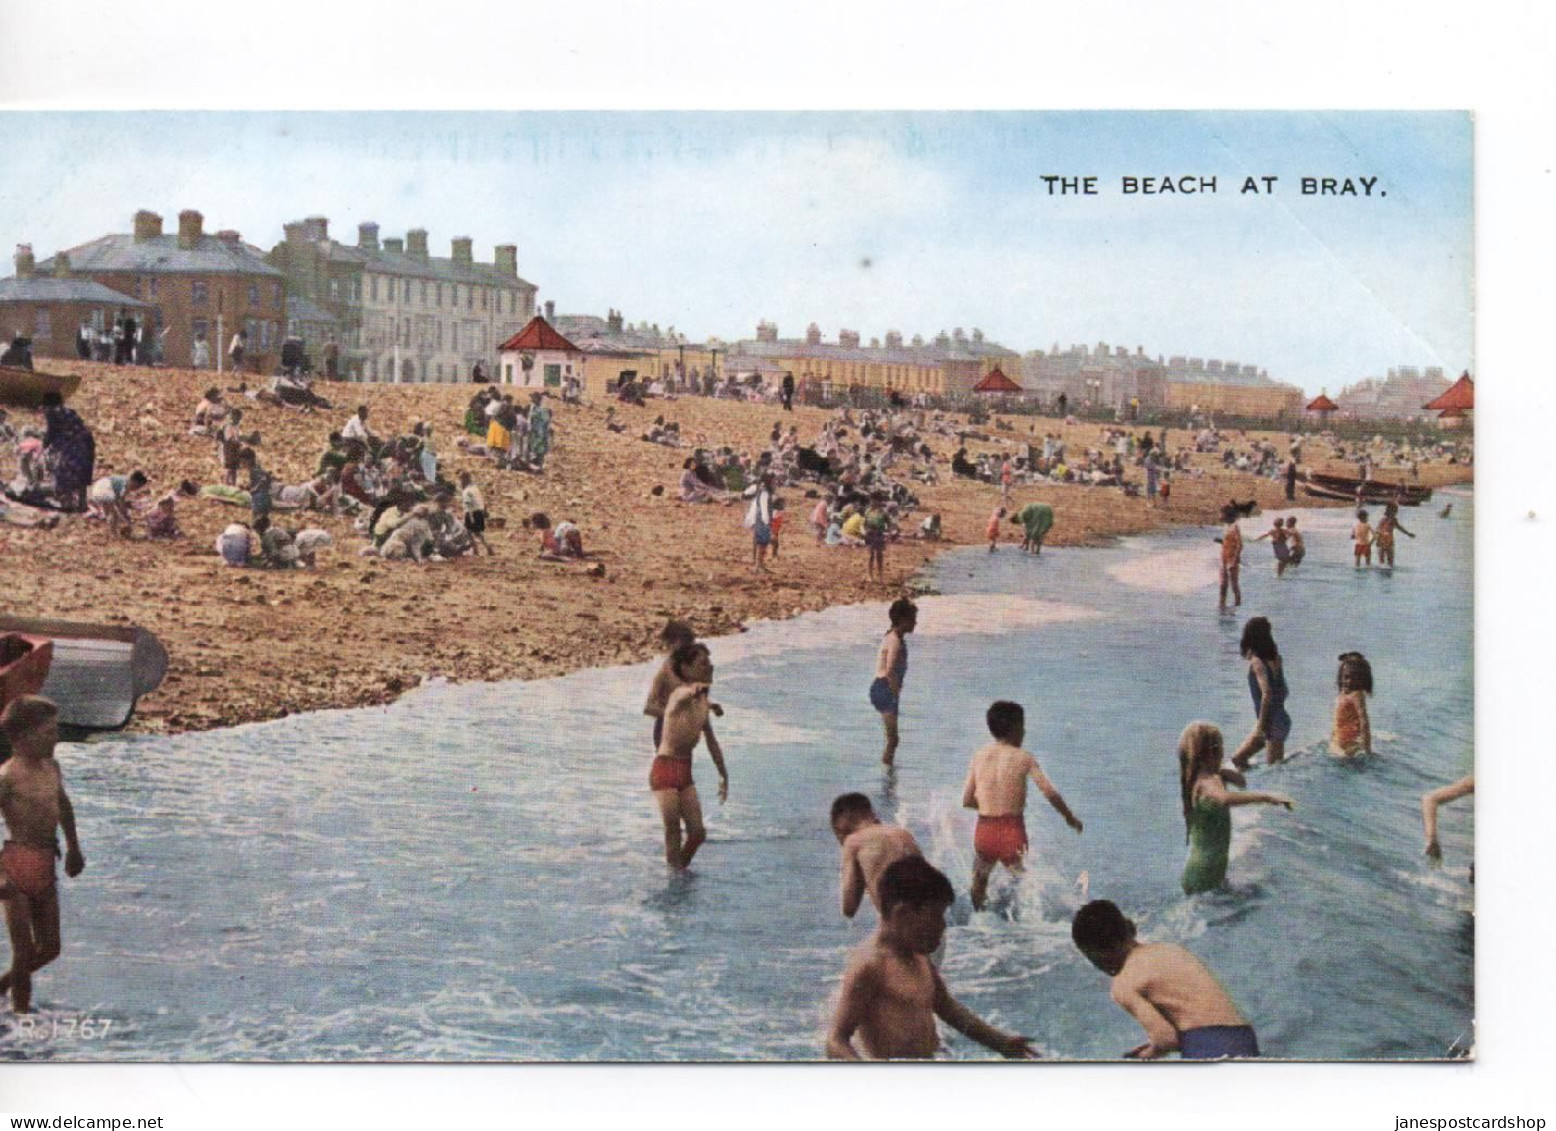 COLOURED POSTCARD -THE BEACH AT BRAY - COUNTY WICKLOW - IRELAND - Wicklow